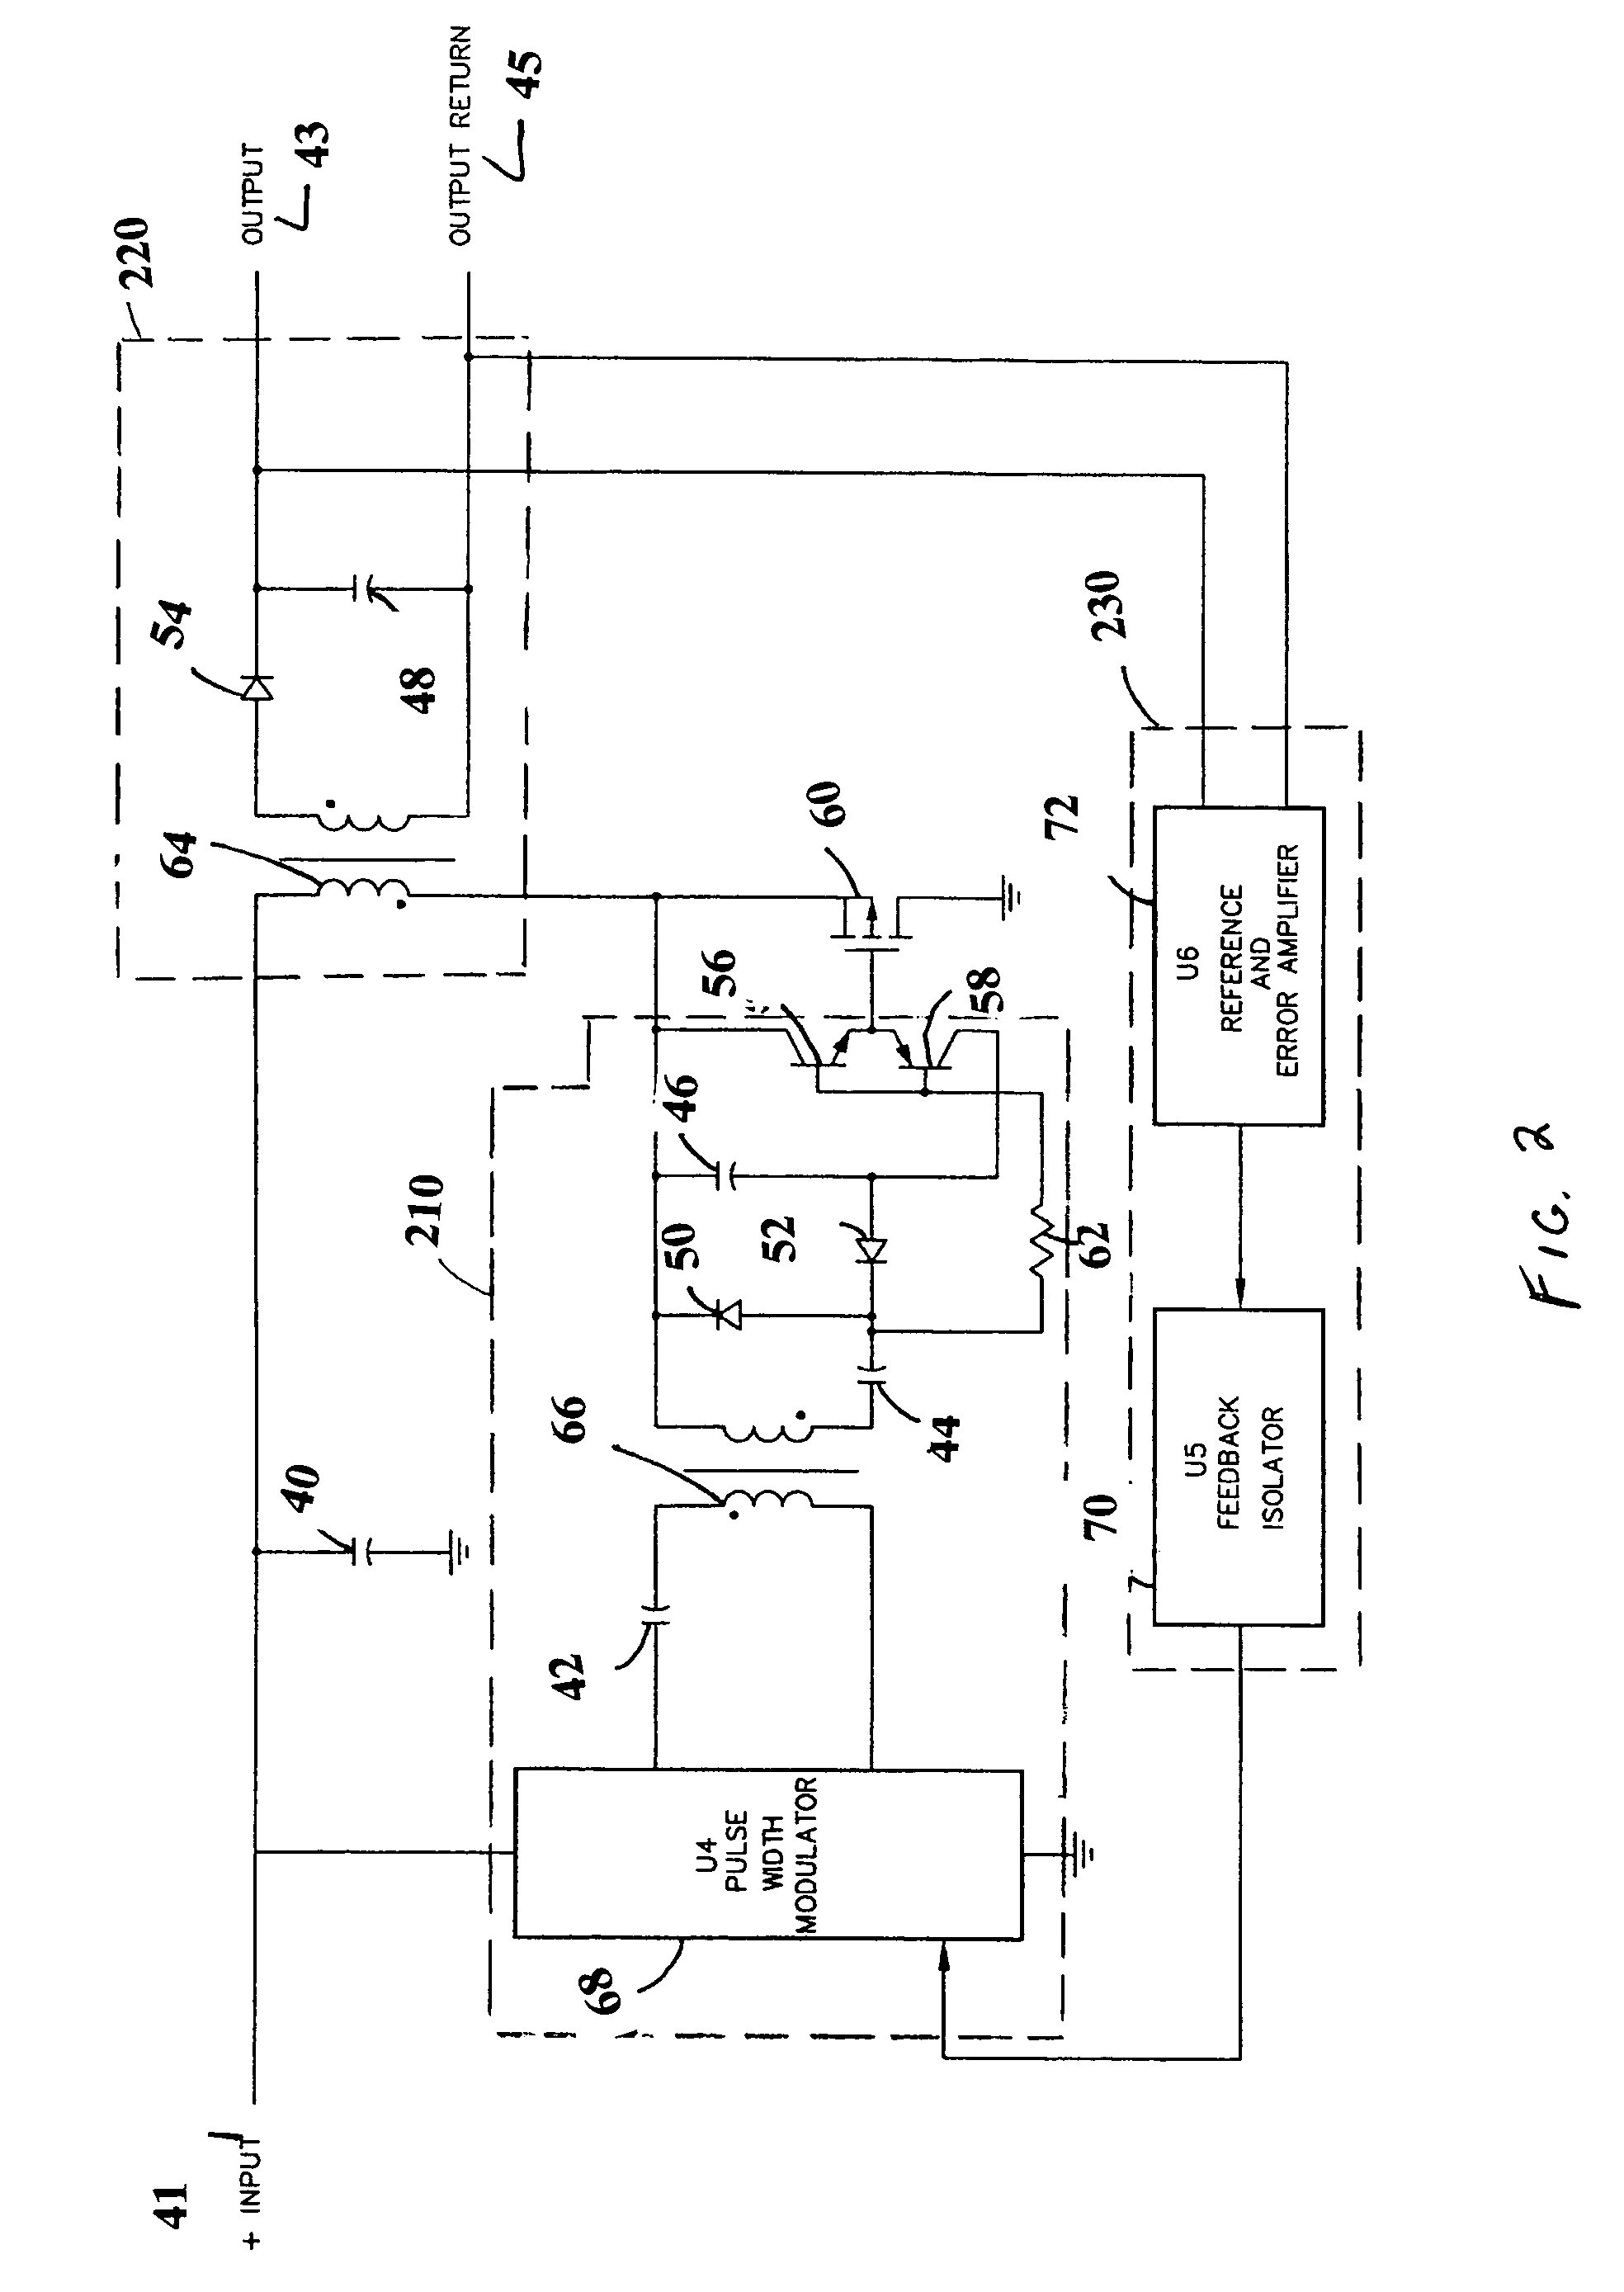 Radiation tolerant electrical component with non-radiation hardened FET